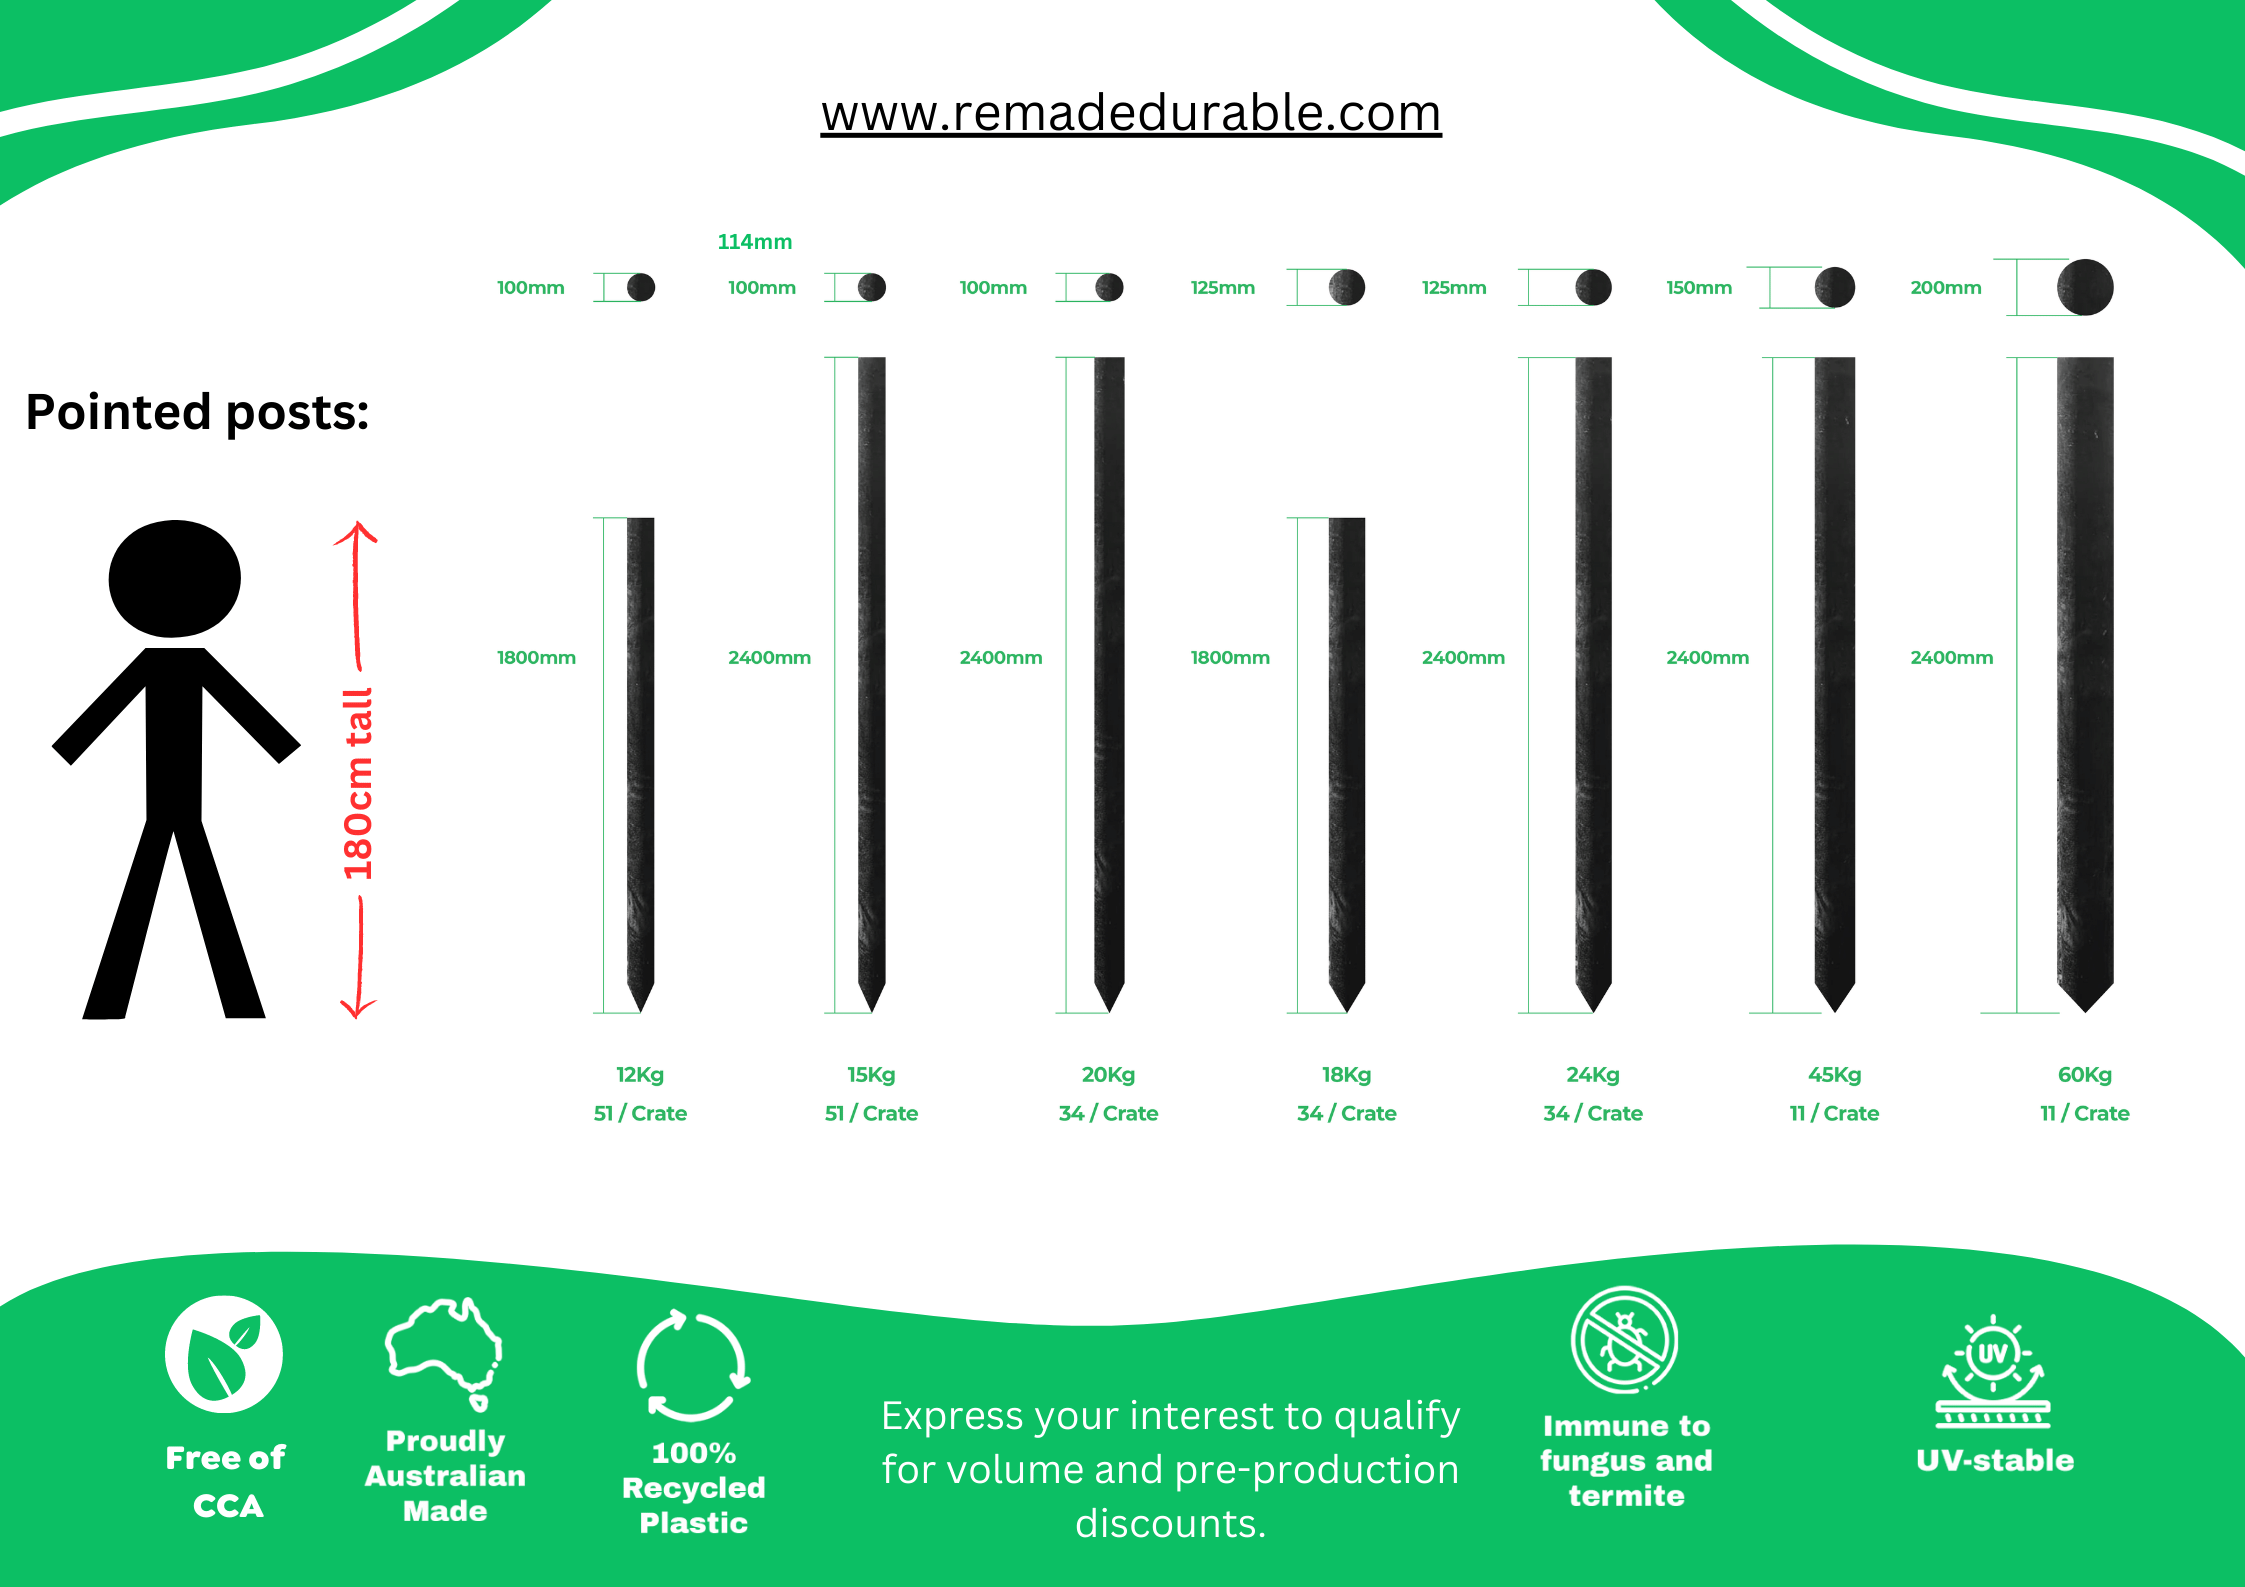 Pointed ReMade Durable Posts